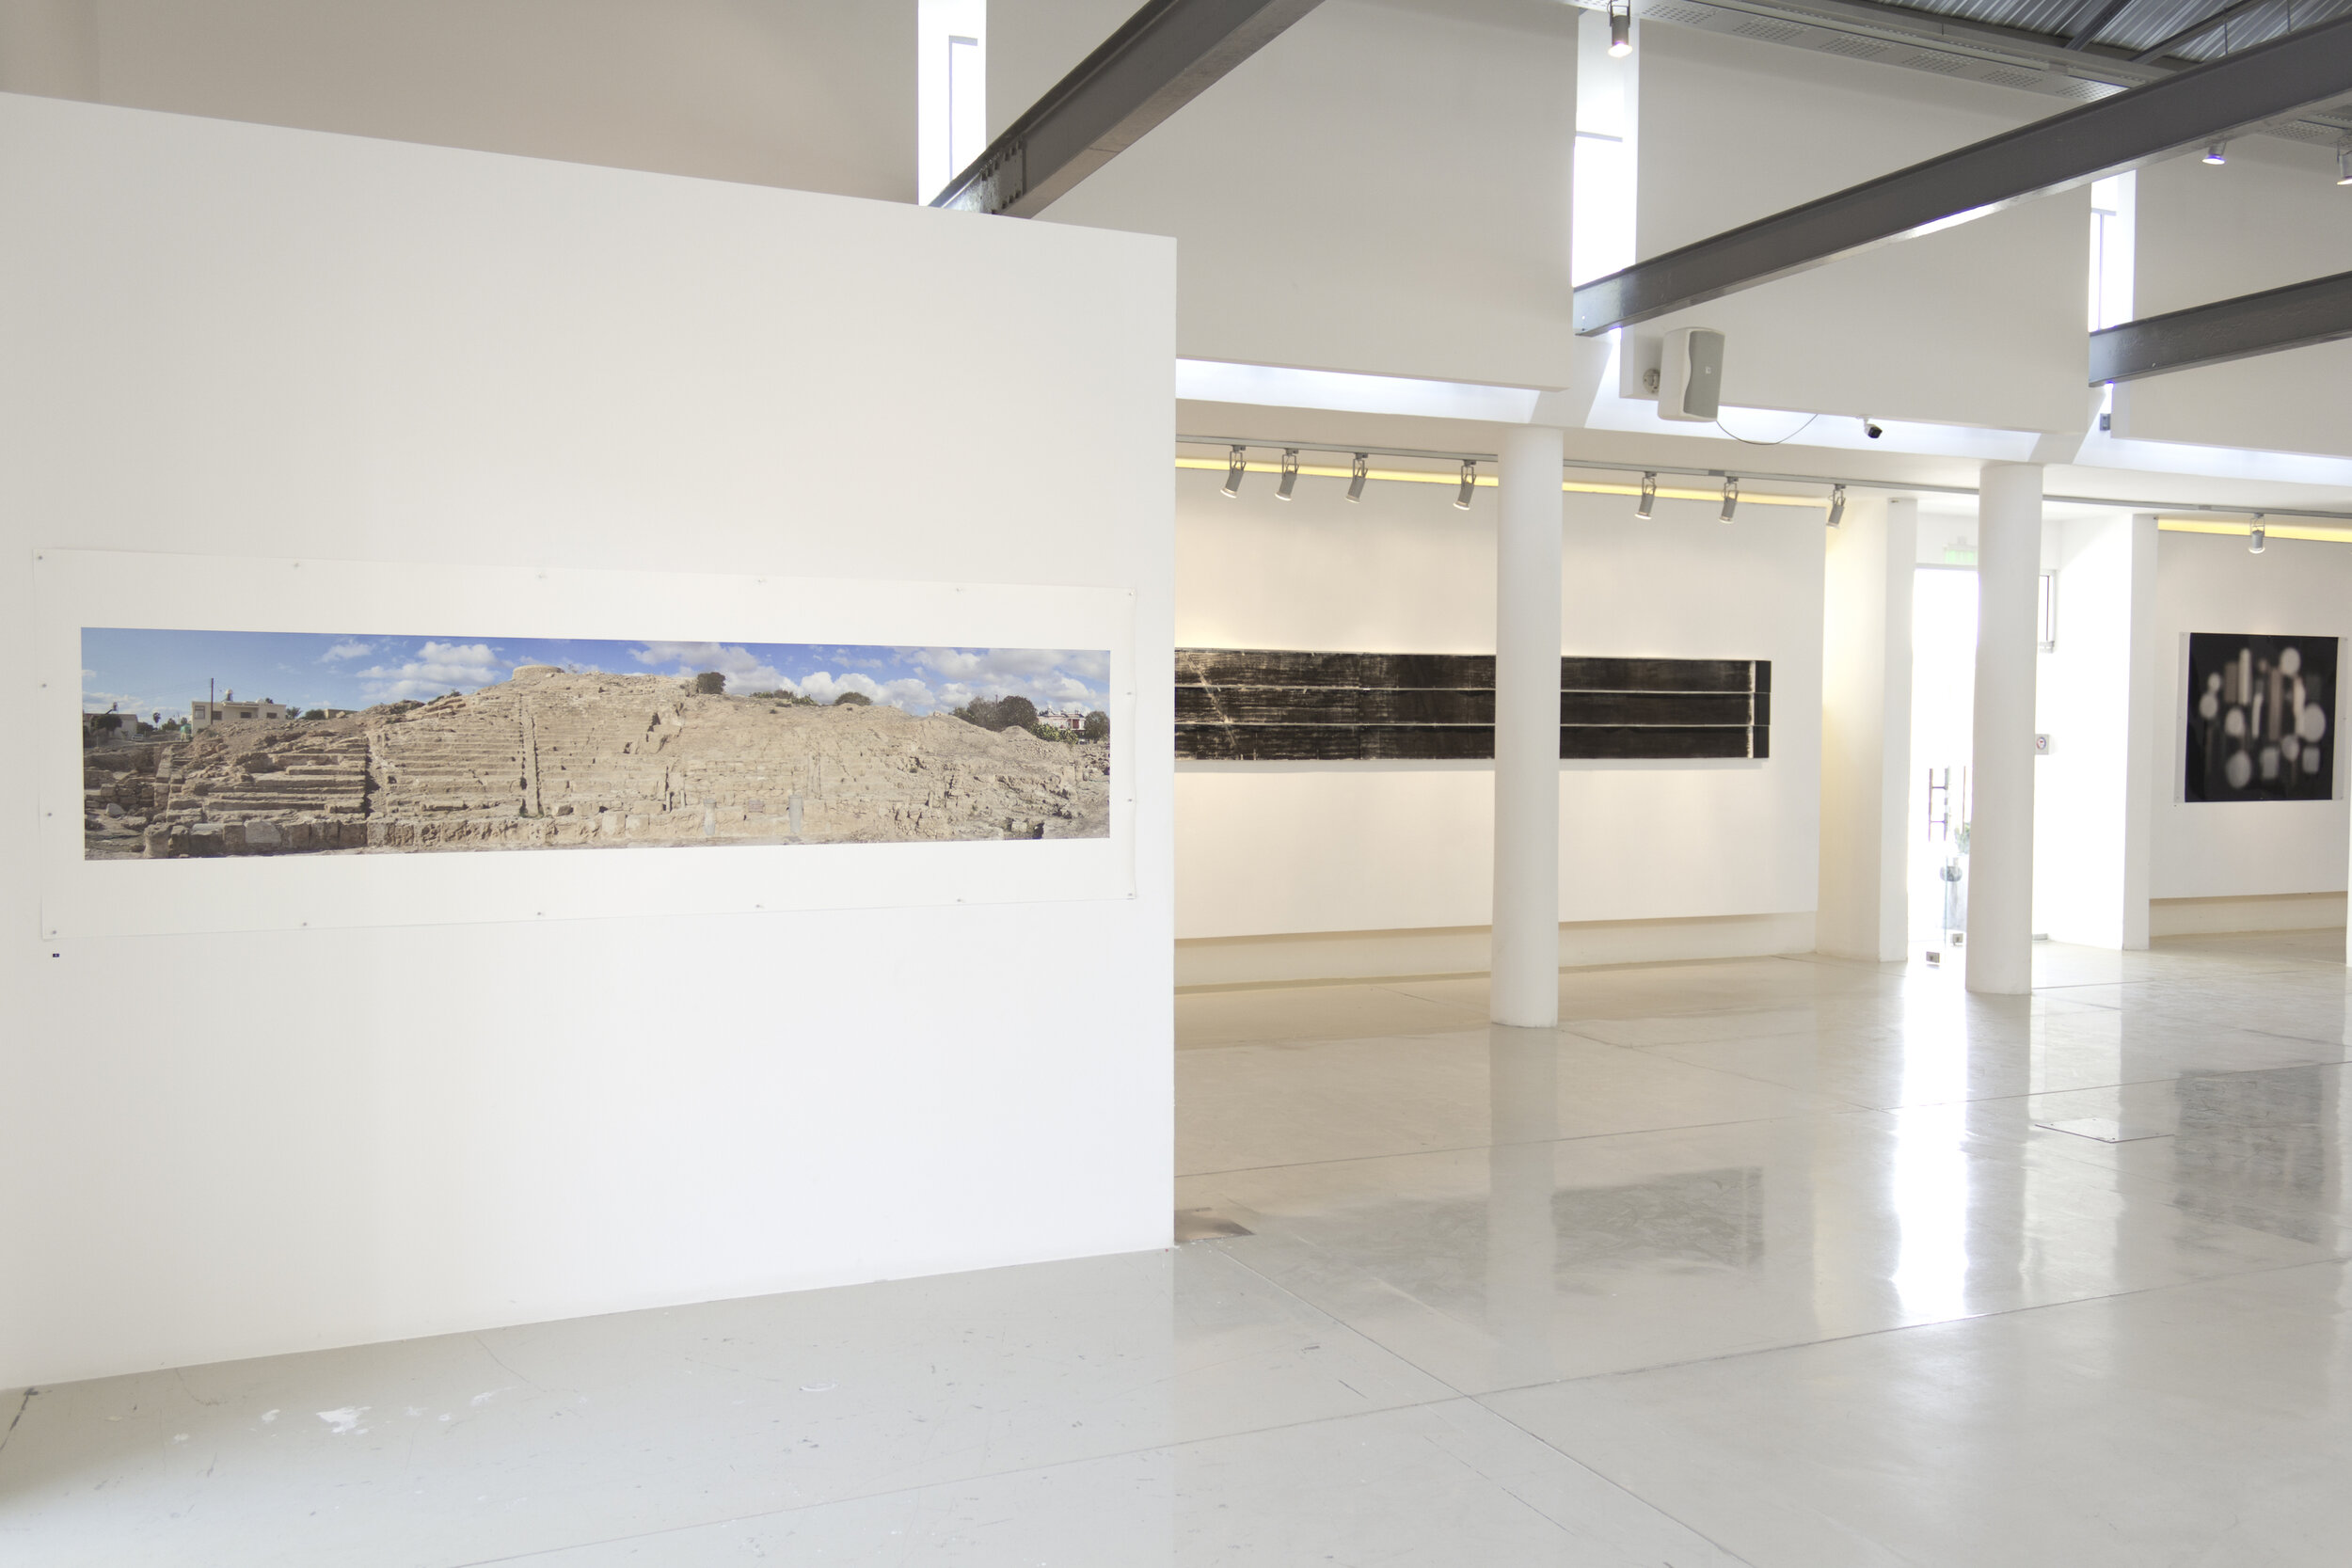  Installation photograph of the group exhibition  Travellers from Australia,  Pailia Ilektriki, Ktima Pafos, Cyprus, 2-15 October 2017. Works by artists (left to right):  Guy Hazell  ,  Lawrence Wallen , and  Jacky Redgate  visible in the gallery. Ph